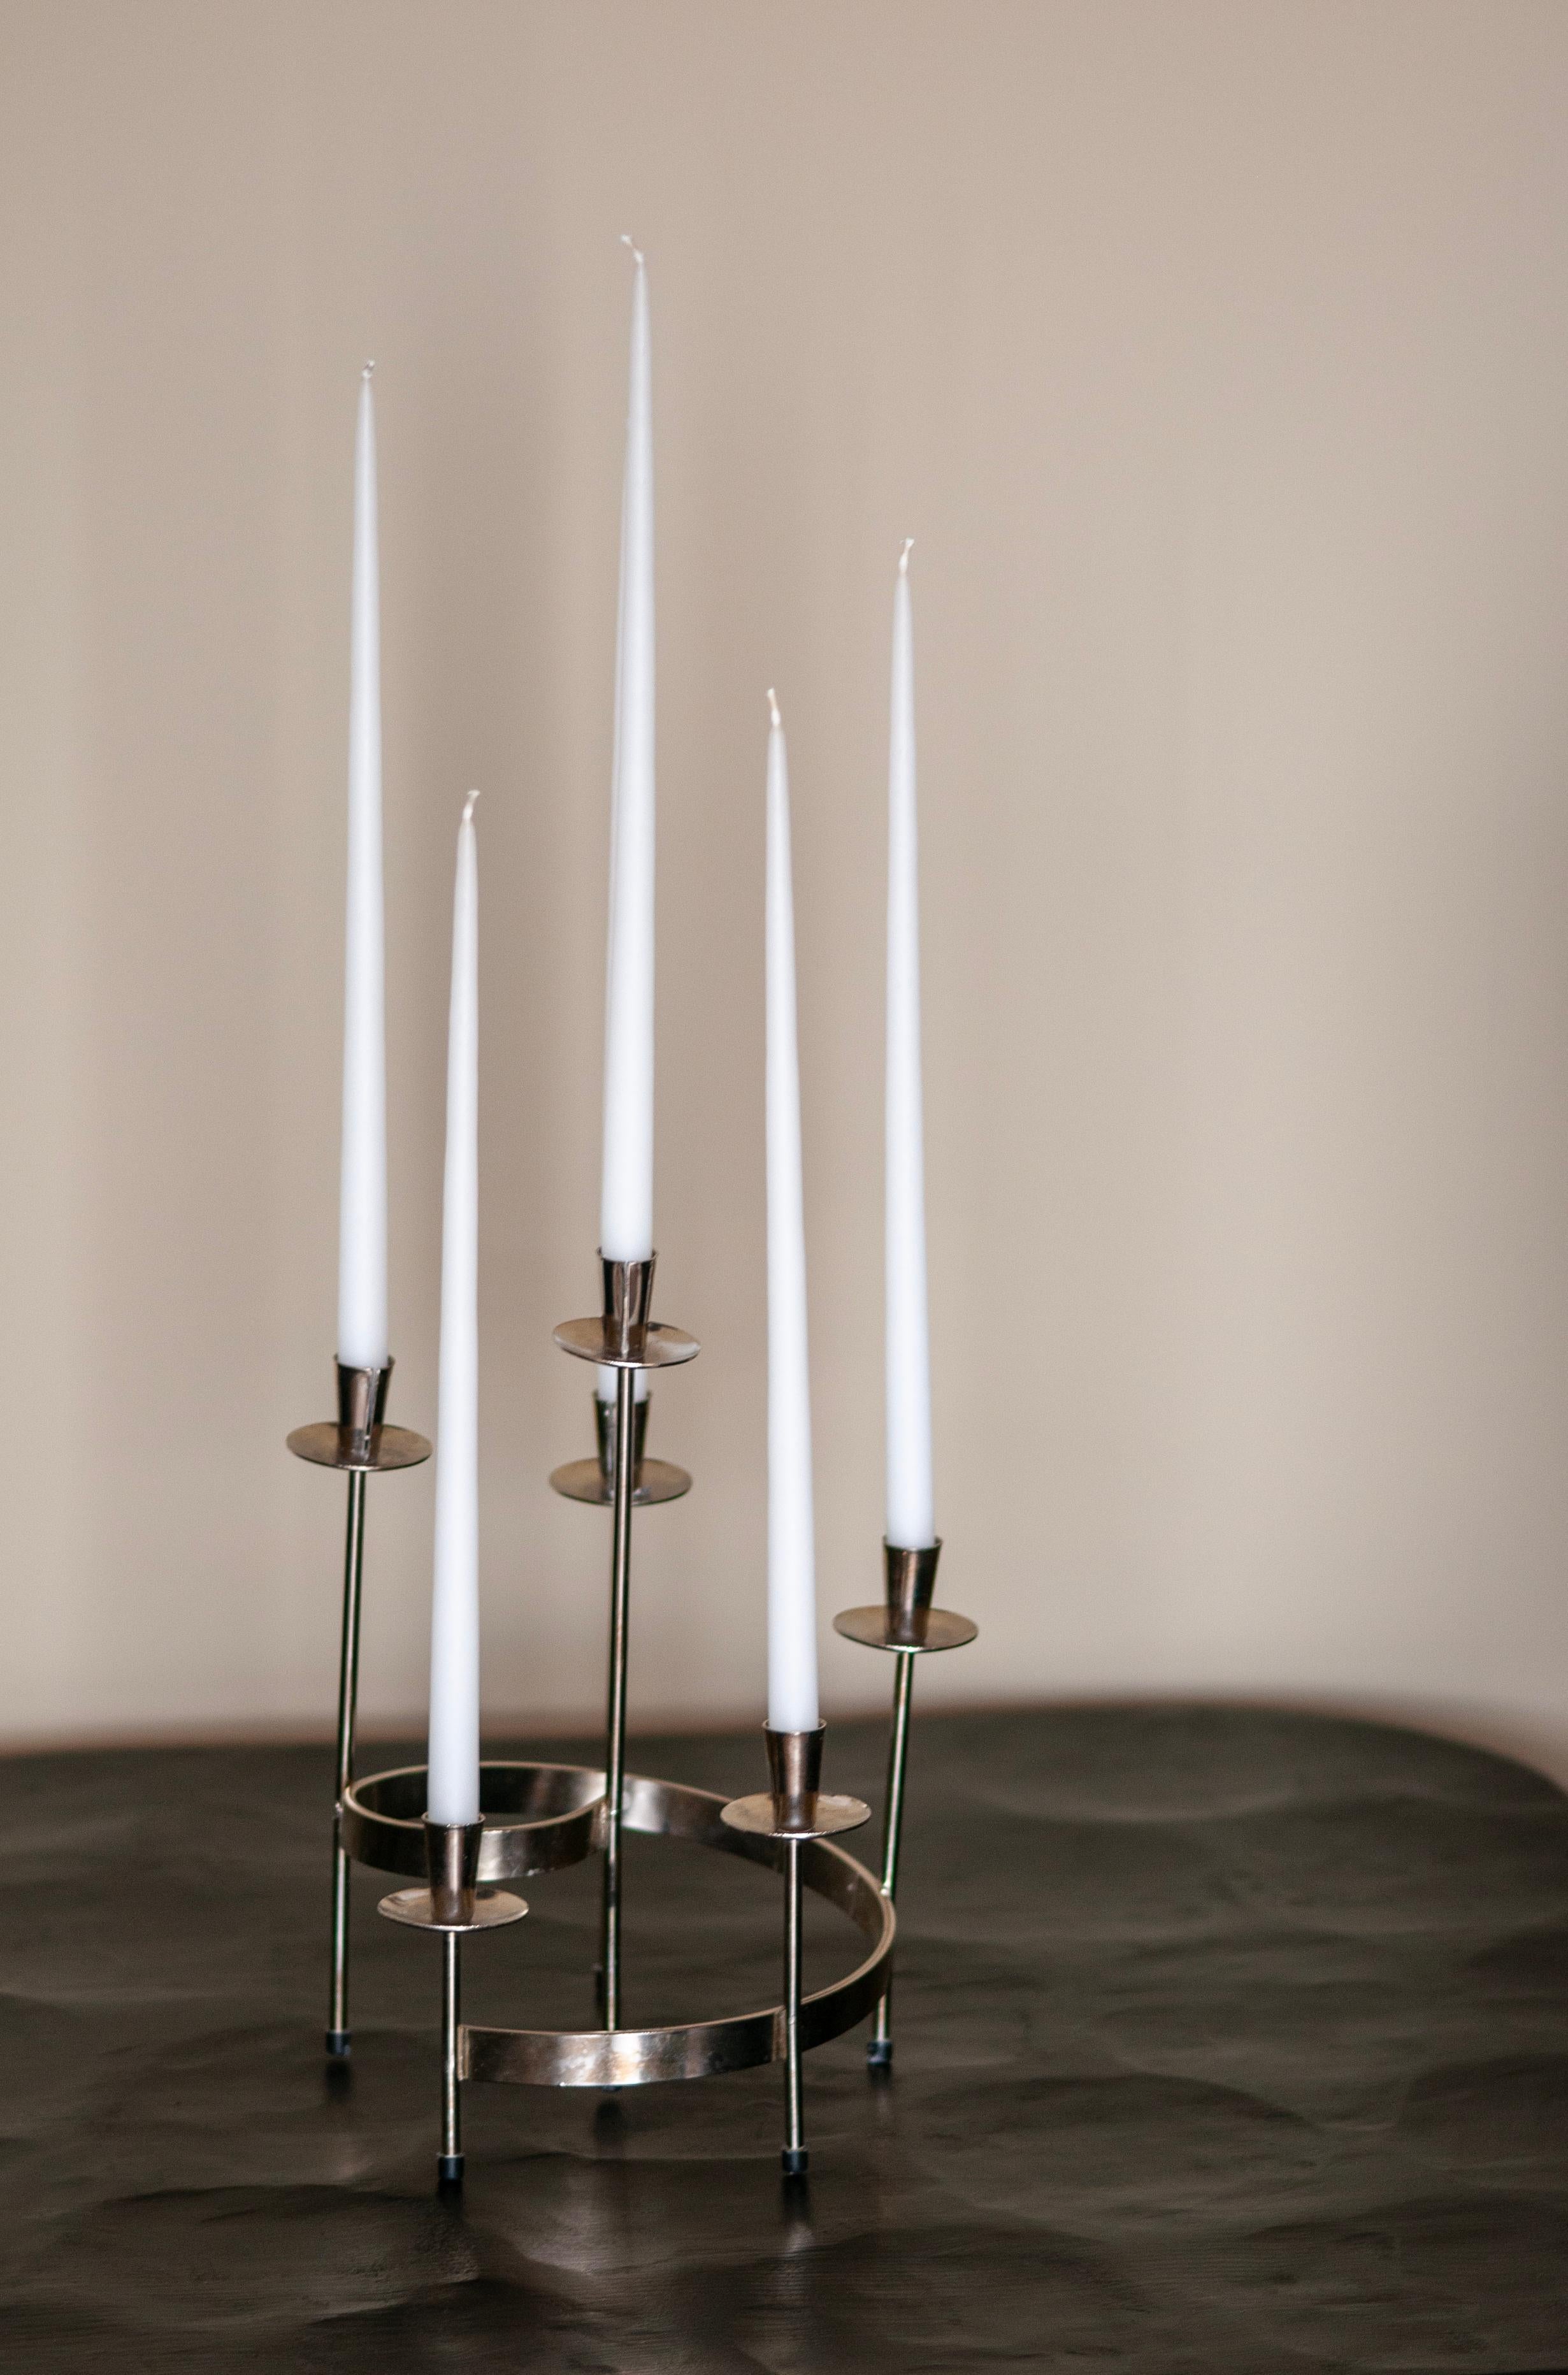 Presenting a delightful round, vintage Mid-Century modern Swedish candlestick, exquisitely handcrafted from white metal. This elegant piece was designed by the renowned Gunnar Ander and skillfully produced by Ystad-Metall, showcasing its impeccable